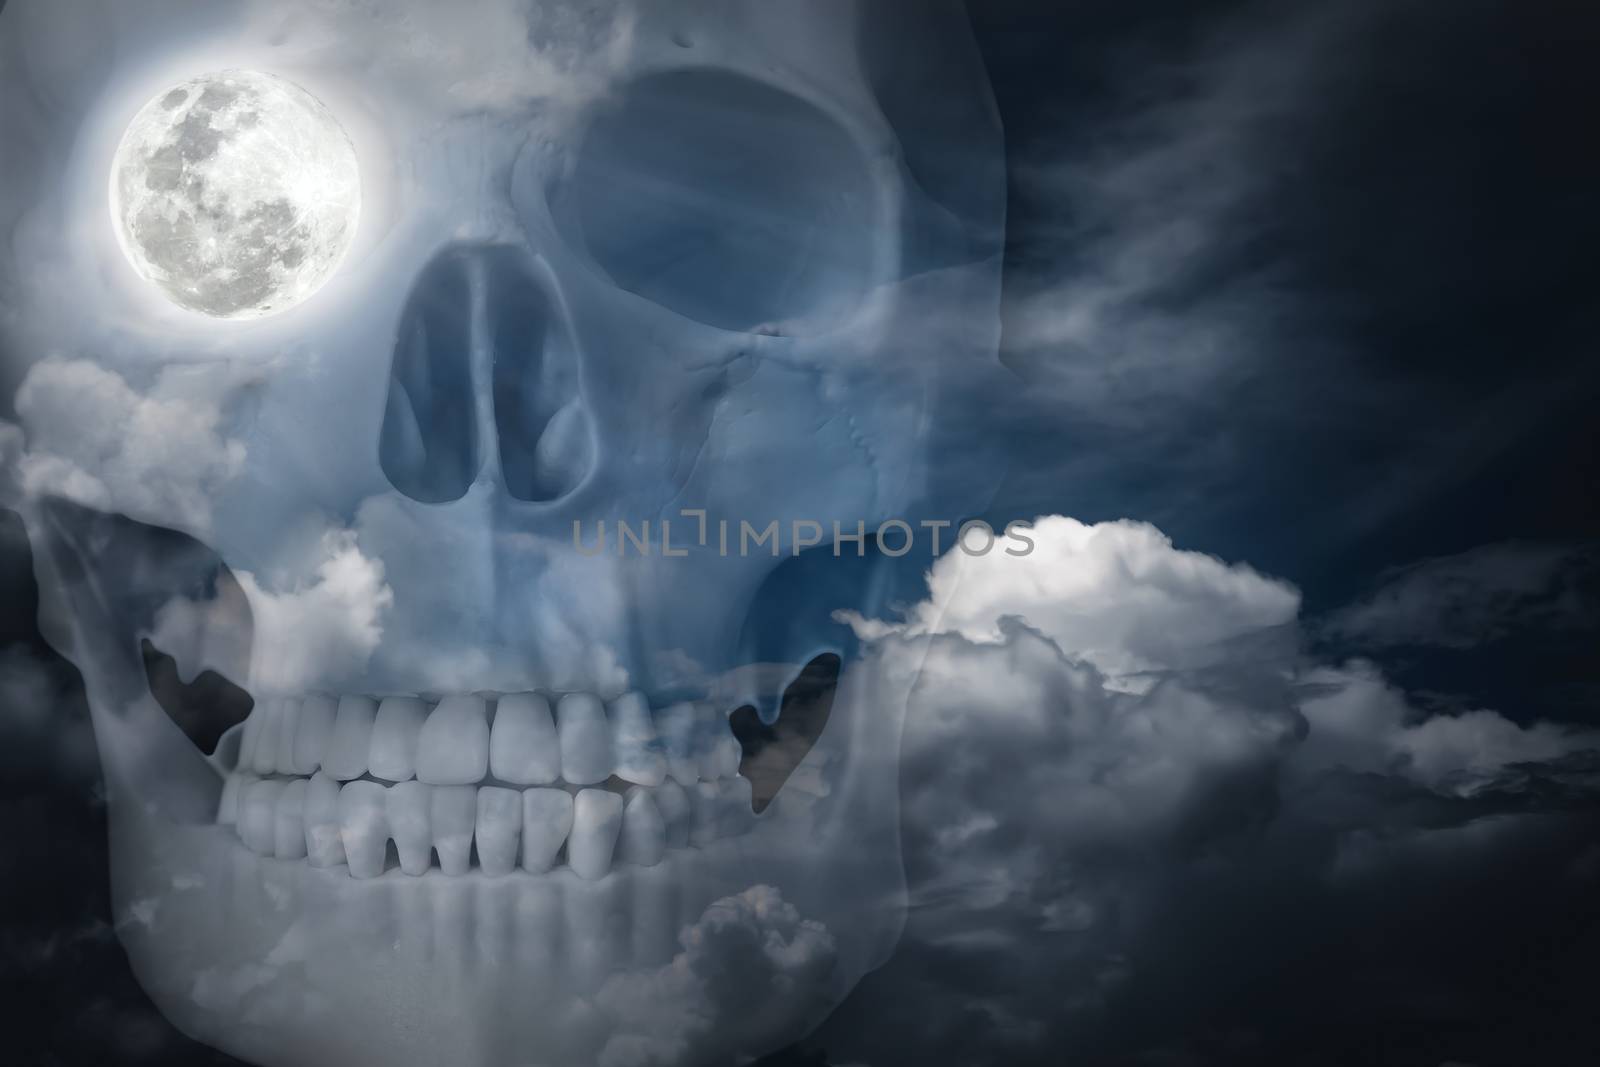 Halloween horror night background. Double exposure of human skull combined sky with clouds . Full moon on right eye socket. The moon taken with my own camera, no NASA images used.